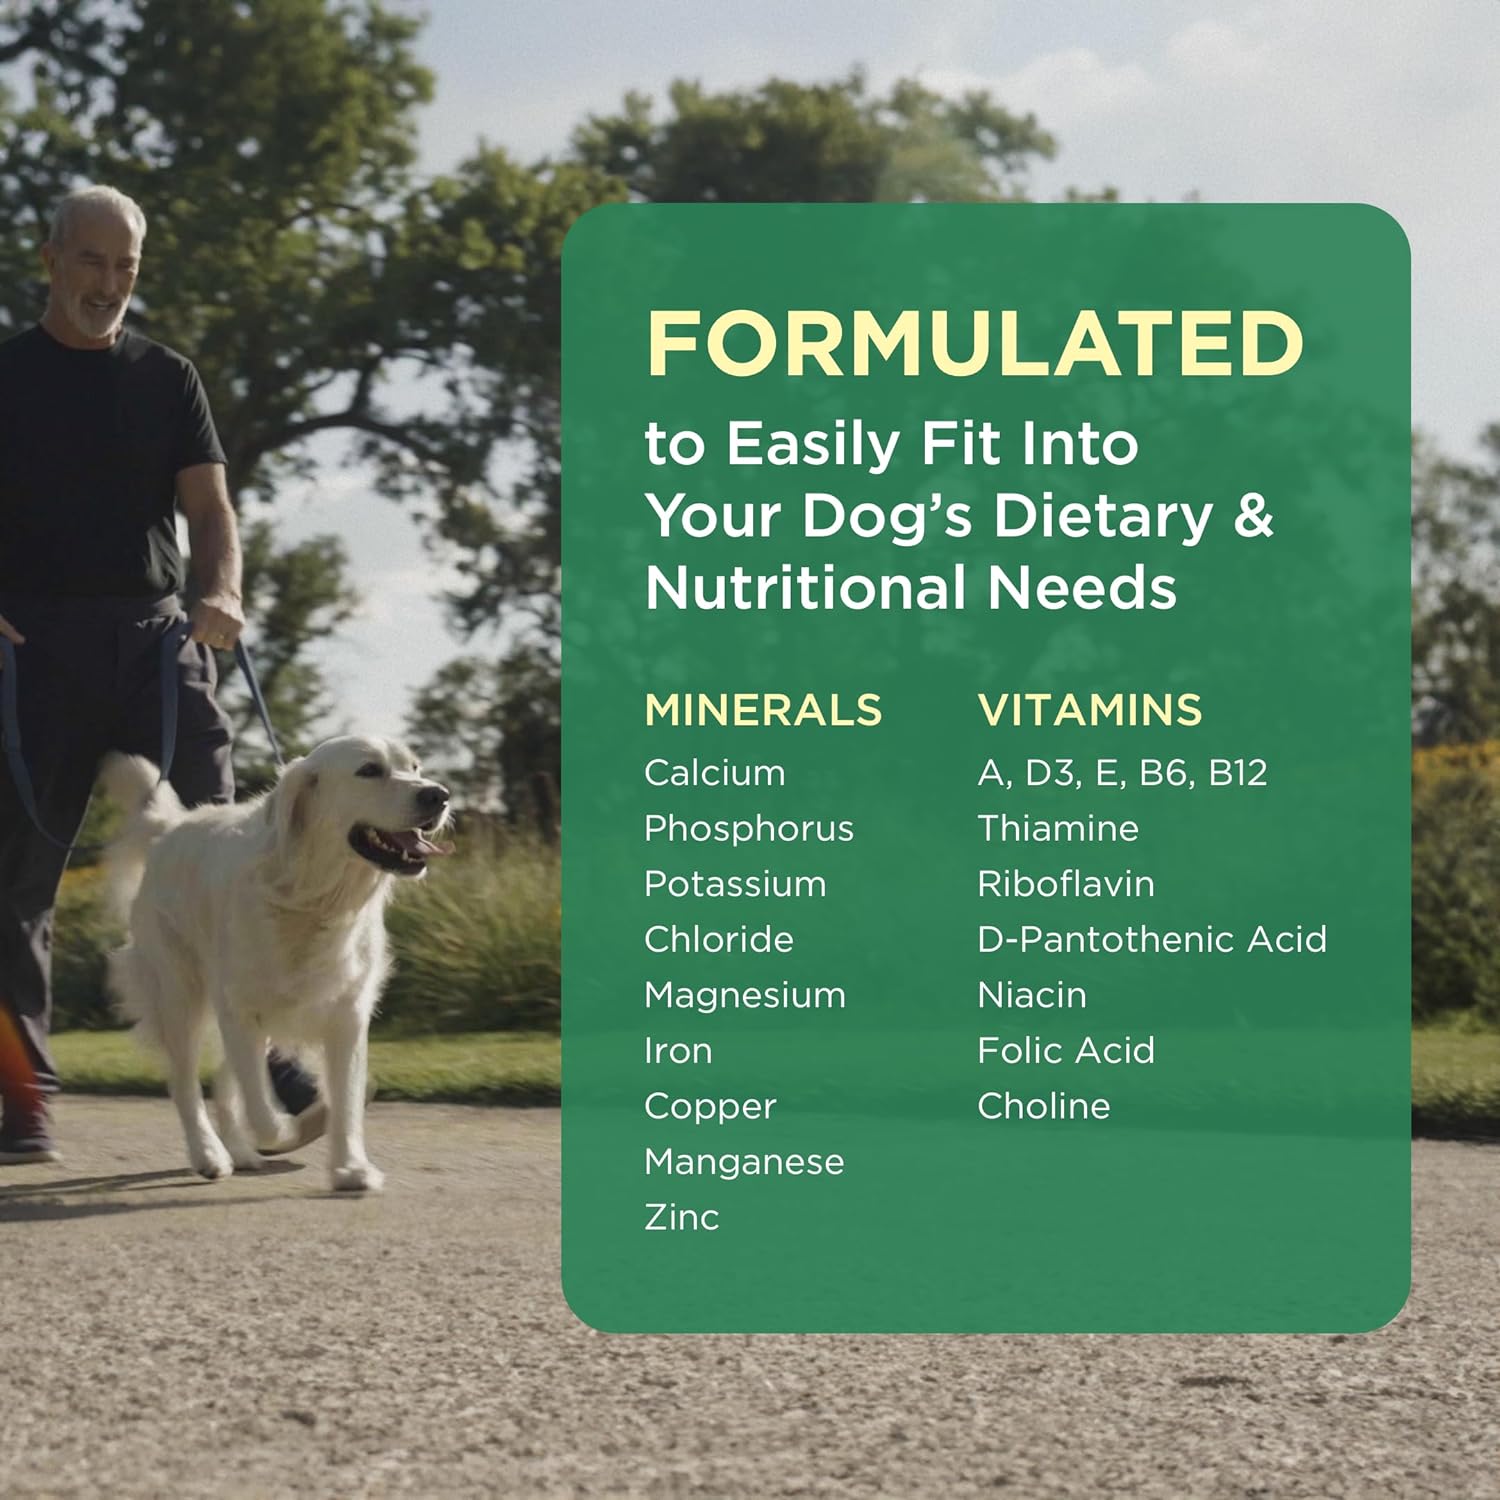 Pet-Tabs Plus Multivitamin and Mineral Supplement for Dogs with Special Nutritional Needs, Chewable Tablet, 60 Count Bottle : Pet Multivitamins : Pet Supplies